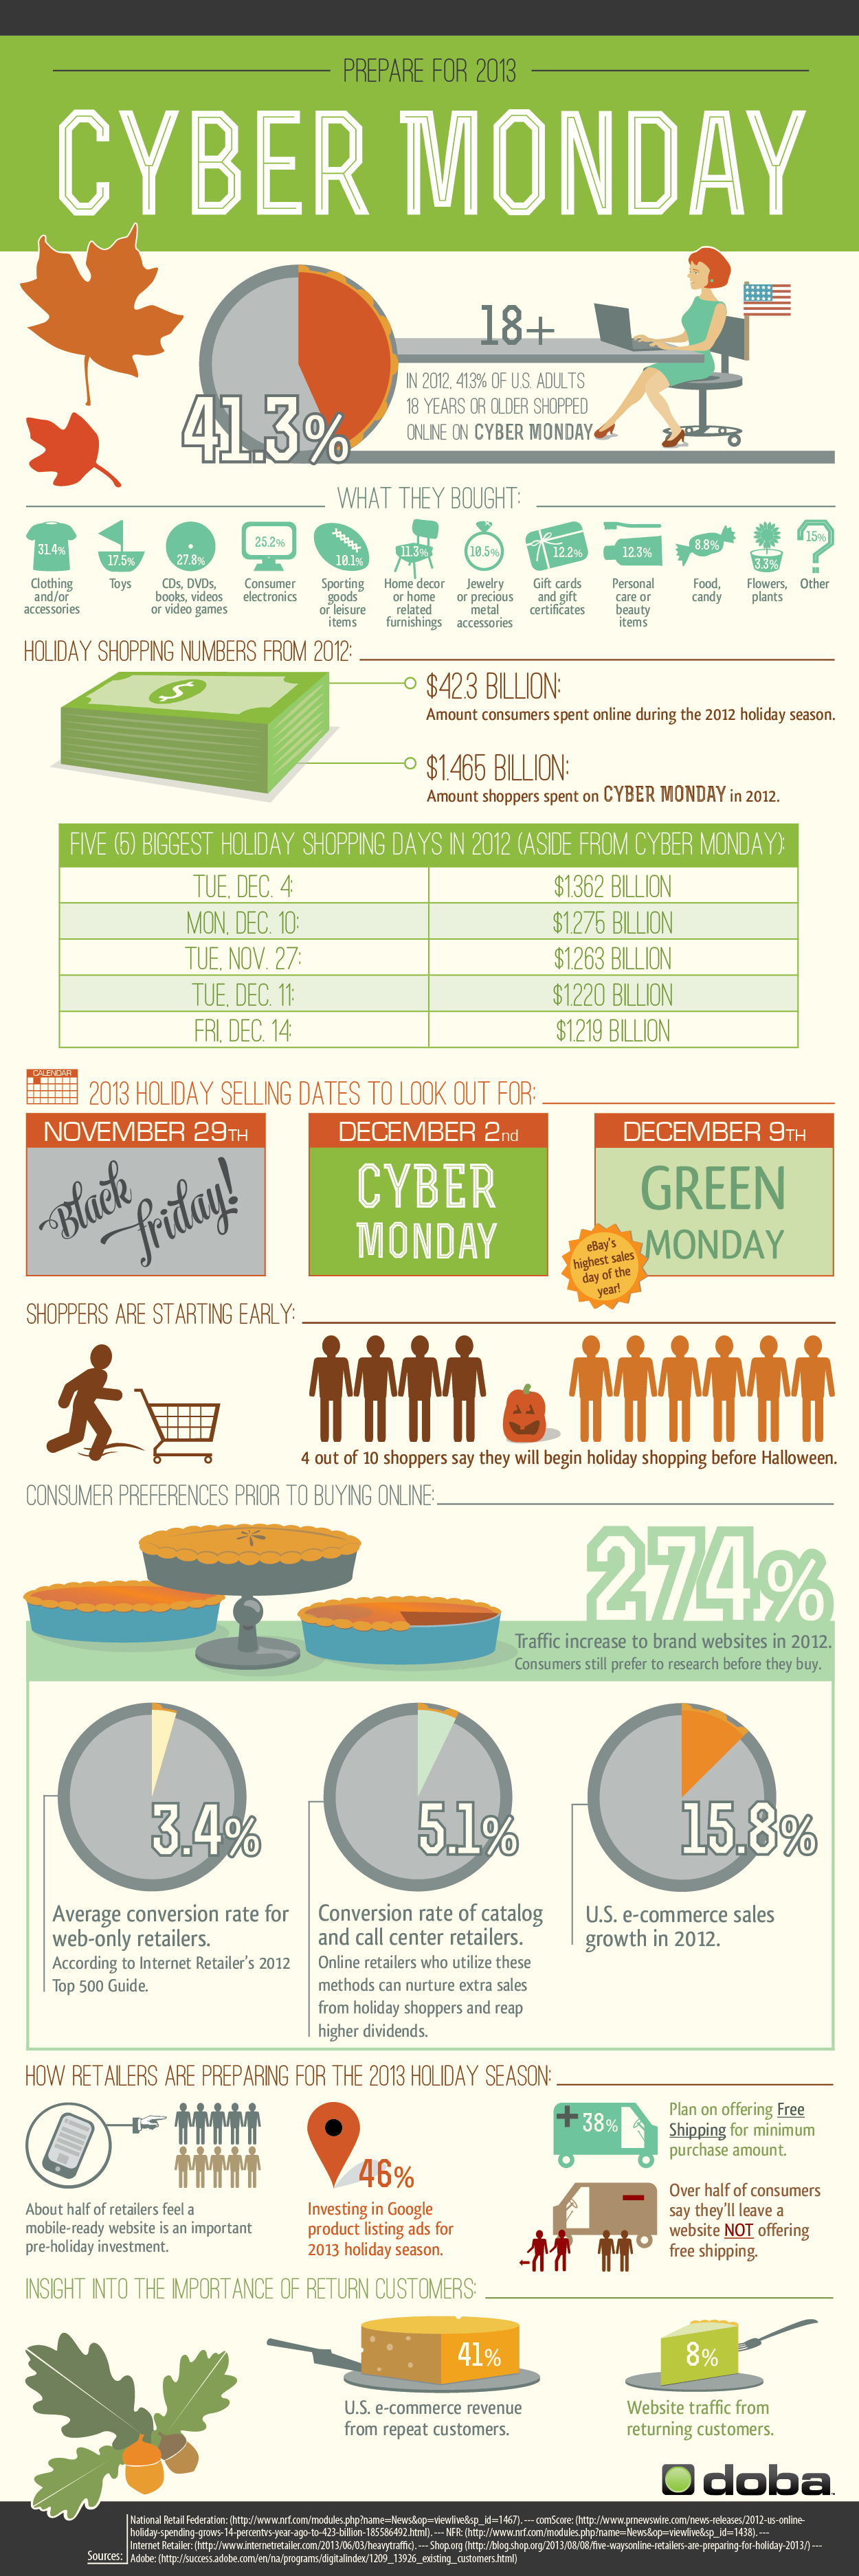 Cyber Deals on Monday Statistics And Facts